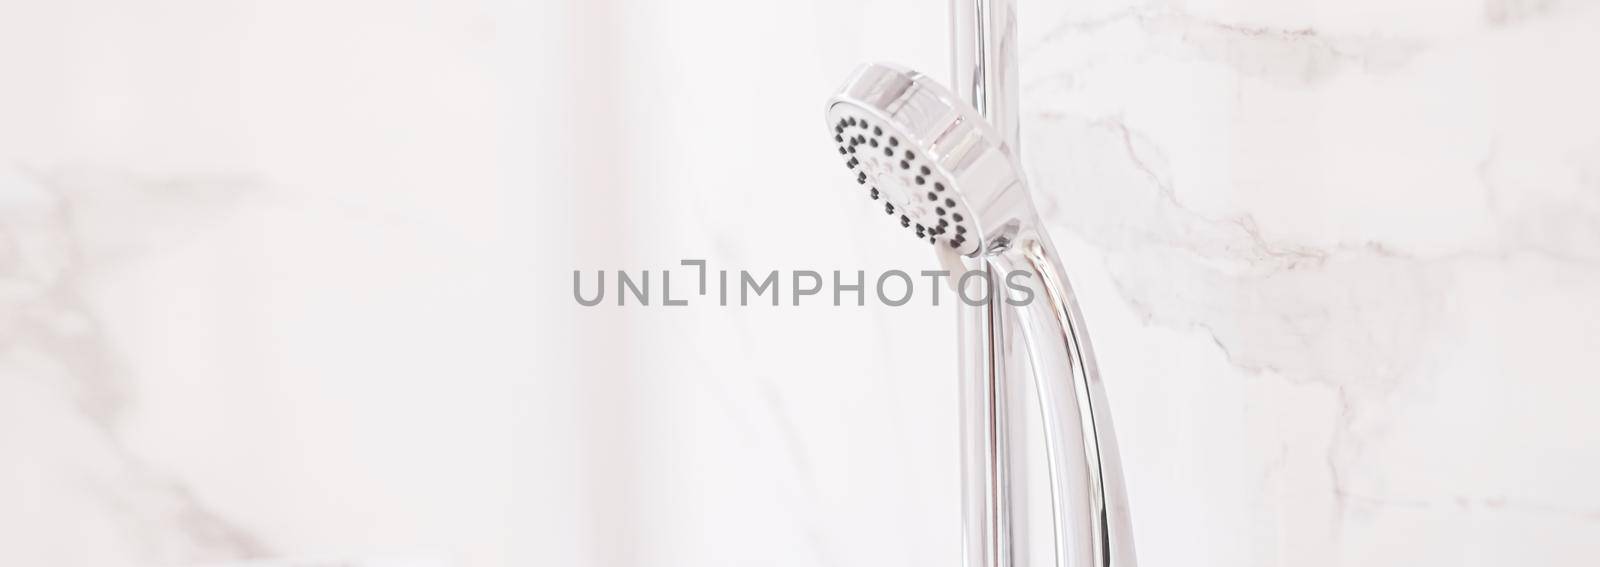 Shower head in luxury bathroom, eco-friendly interior design and sustainable materials concept